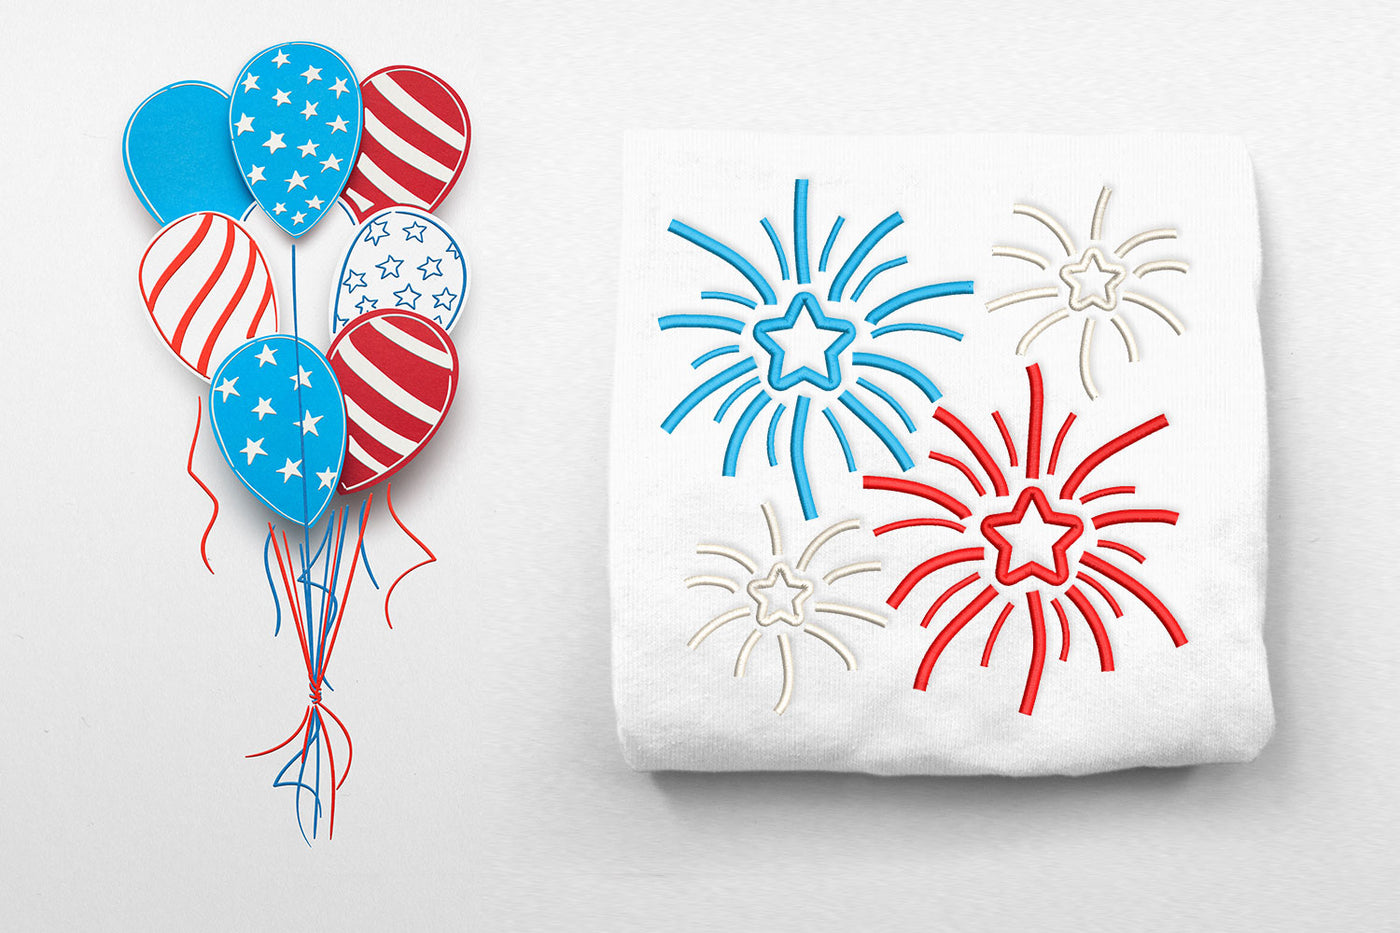 Fireworks clusters with stars embroidery design